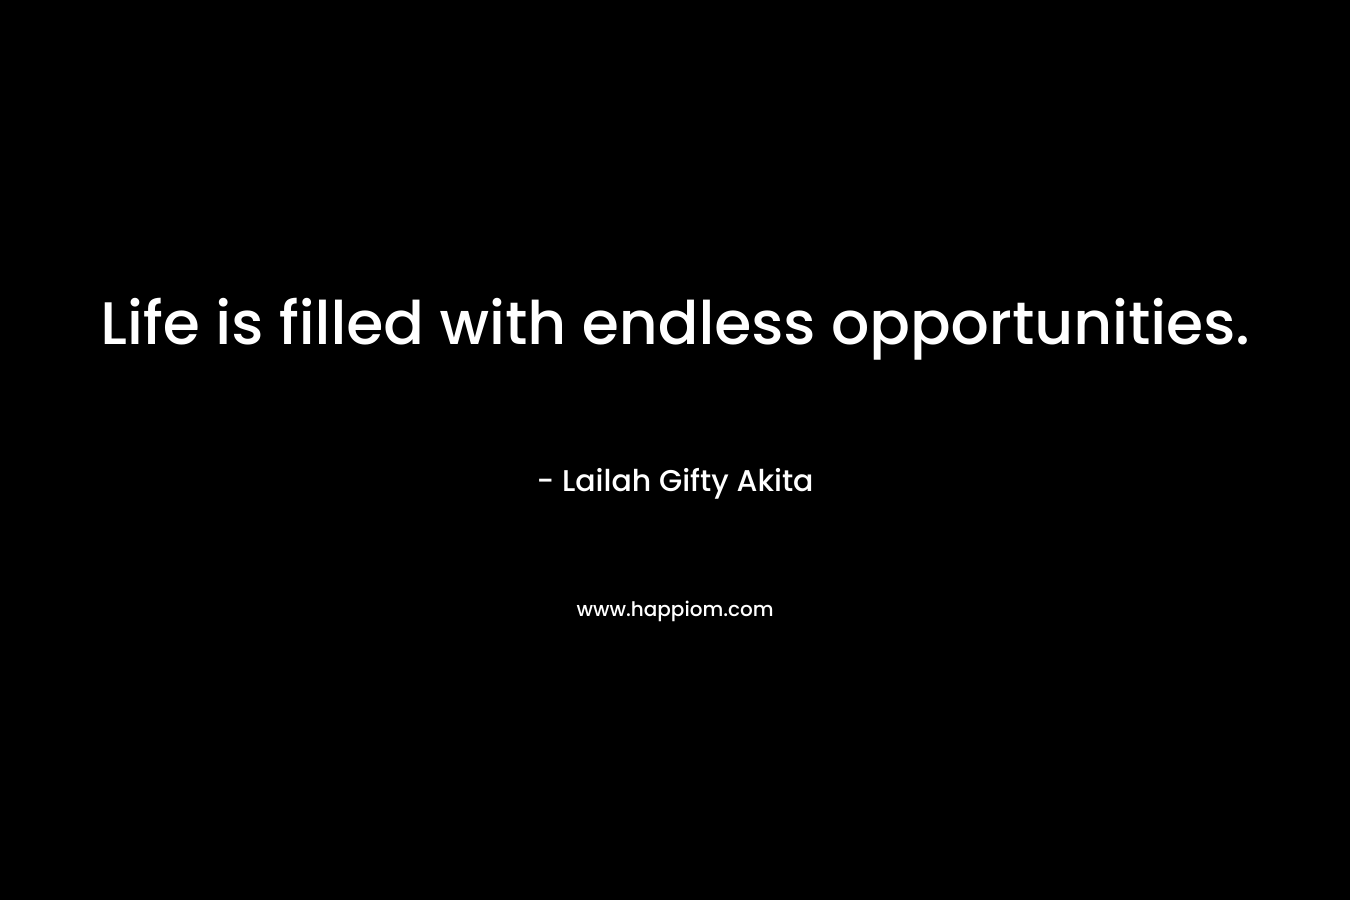 Life is filled with endless opportunities.